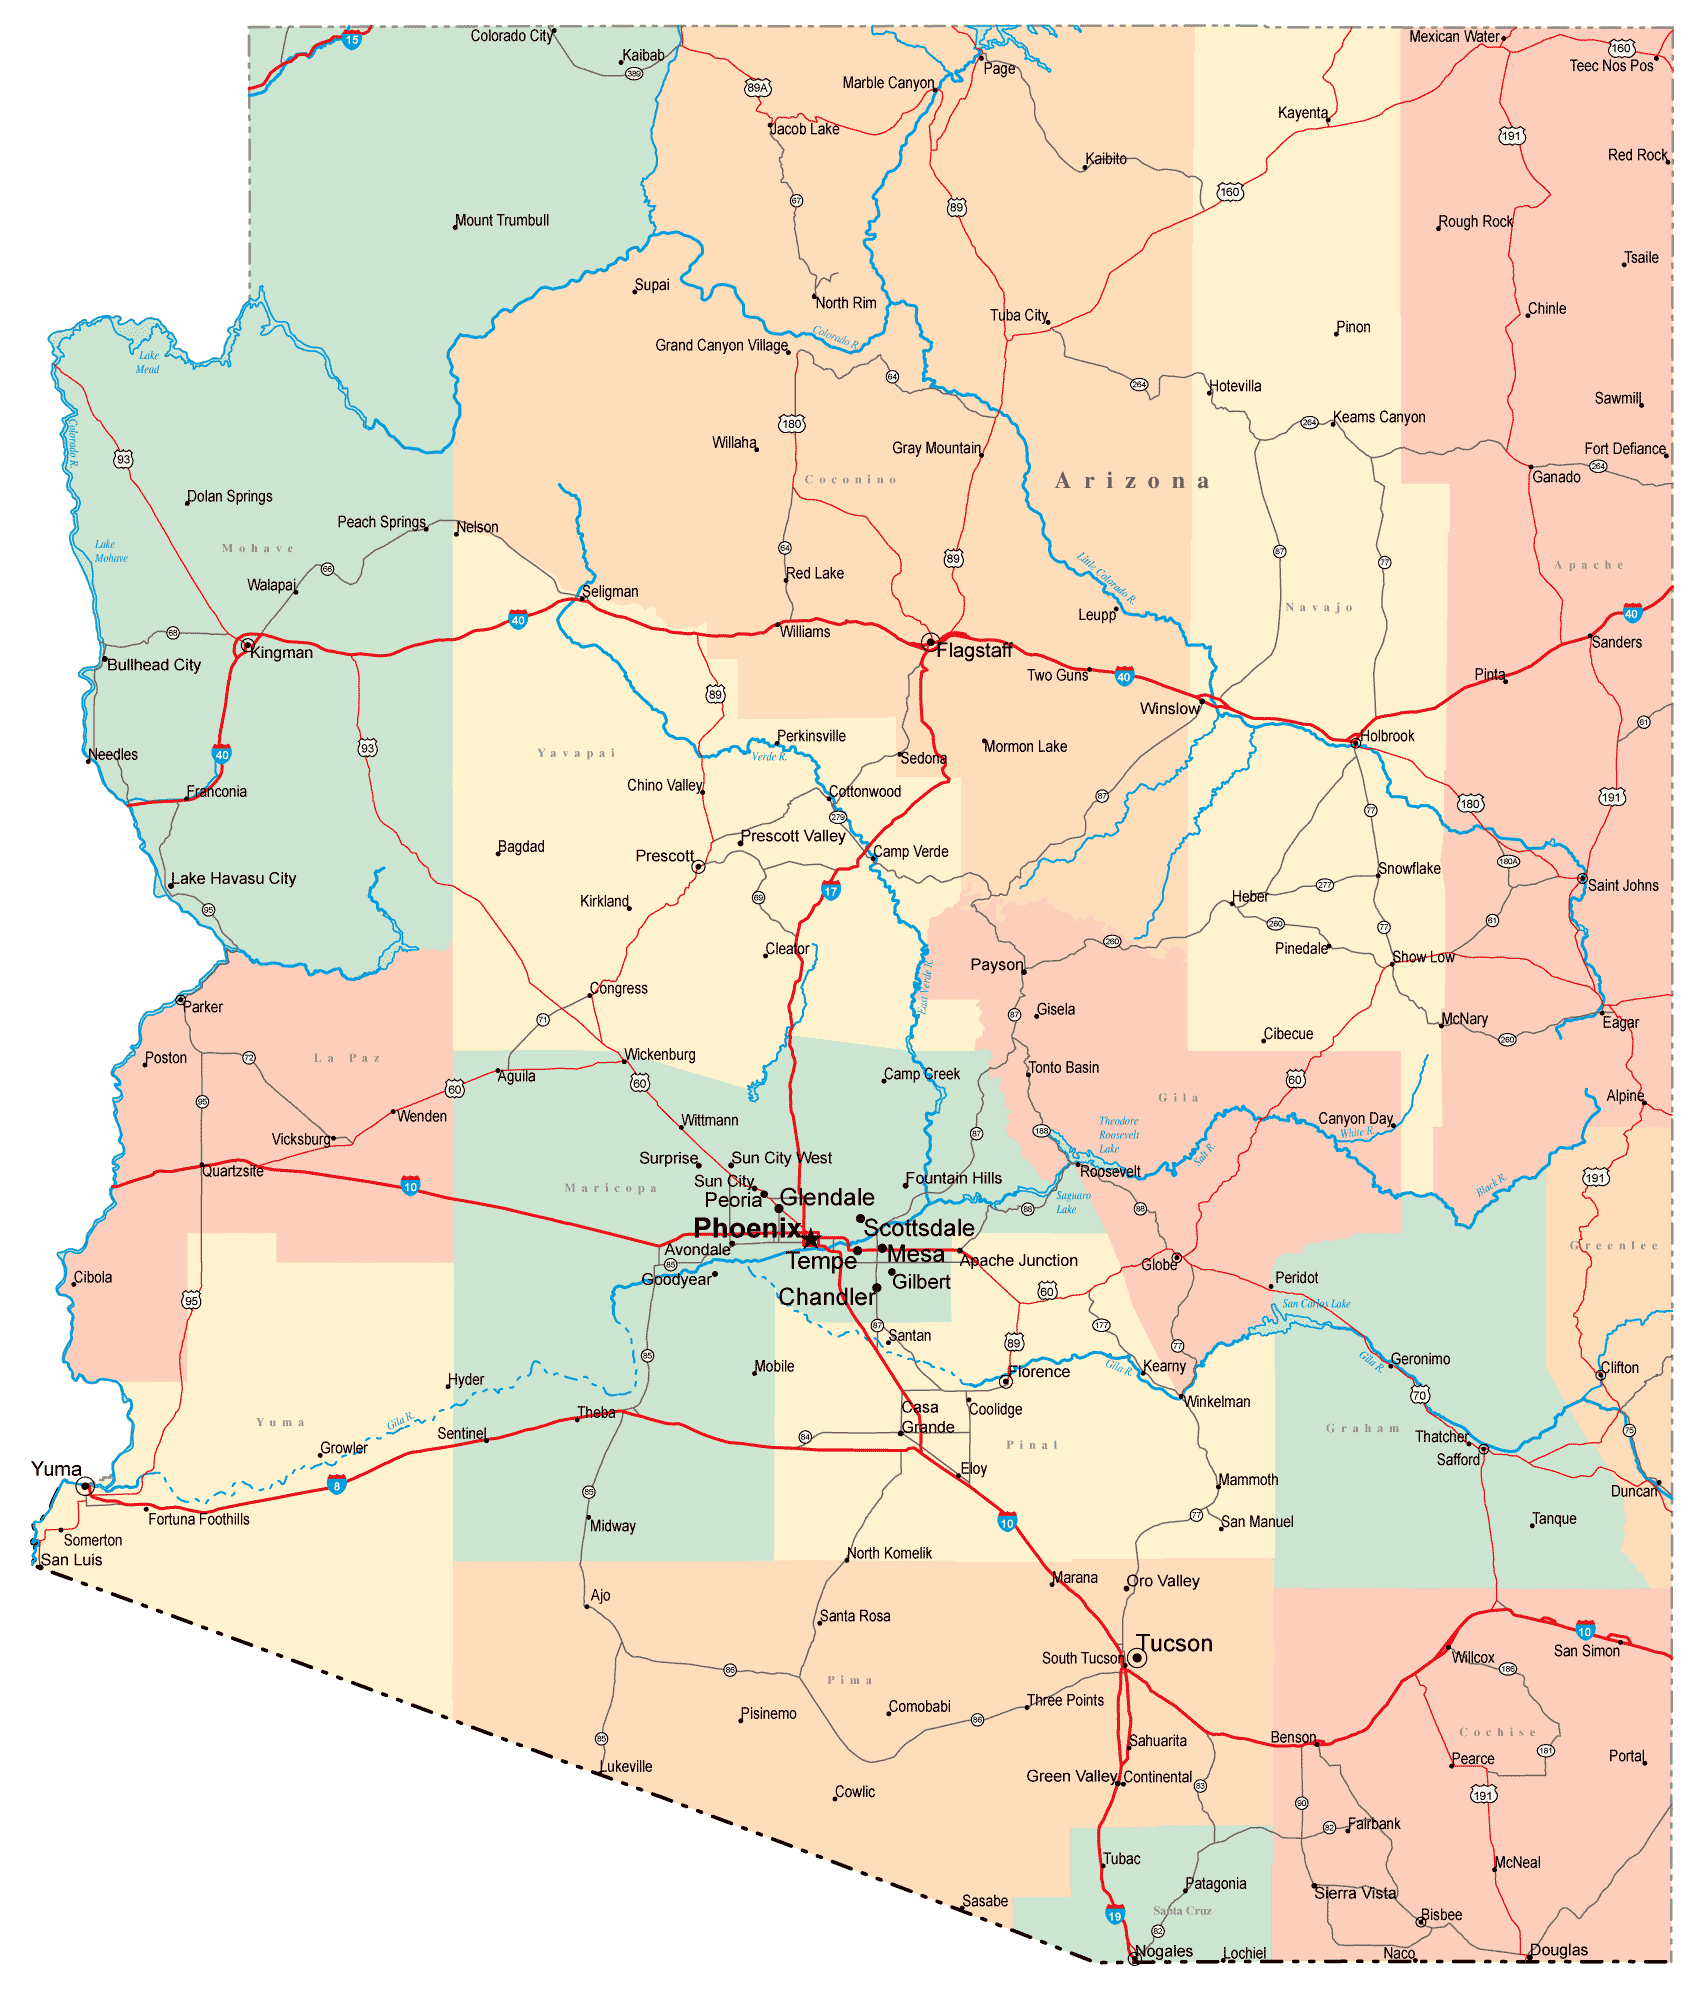 detailed-road-map-of-arizona-with-cities-arizona-detailed-road-map-with-cities-vidiani